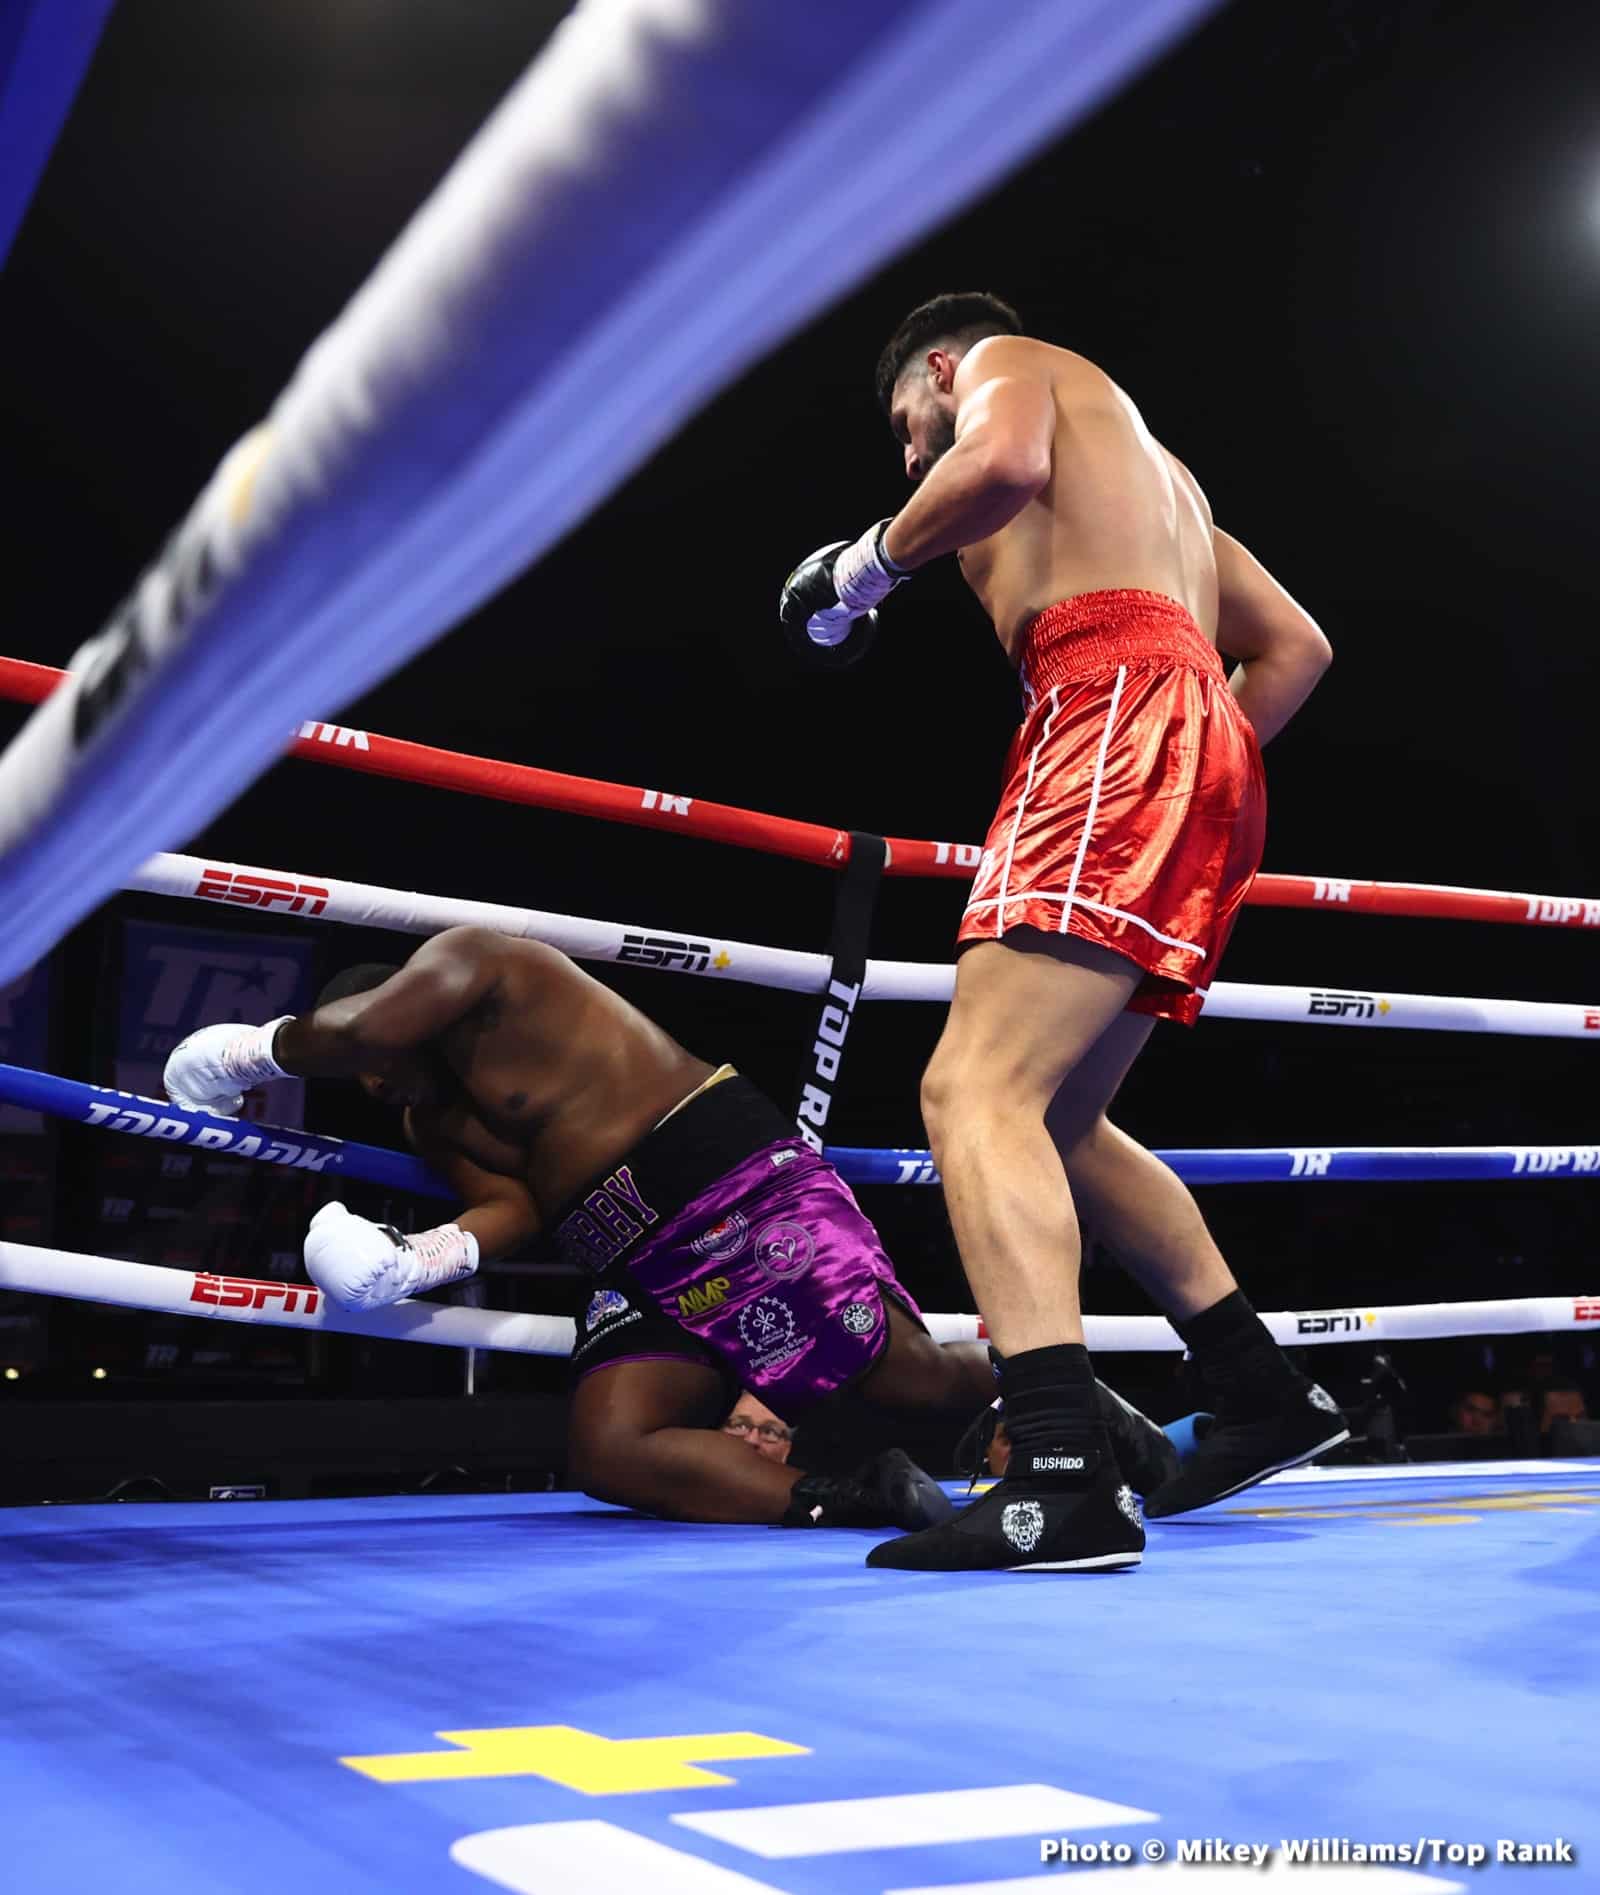 Image: Results / Photos: Alimkhanuly Defeats Bentley to Retain Middleweight Title